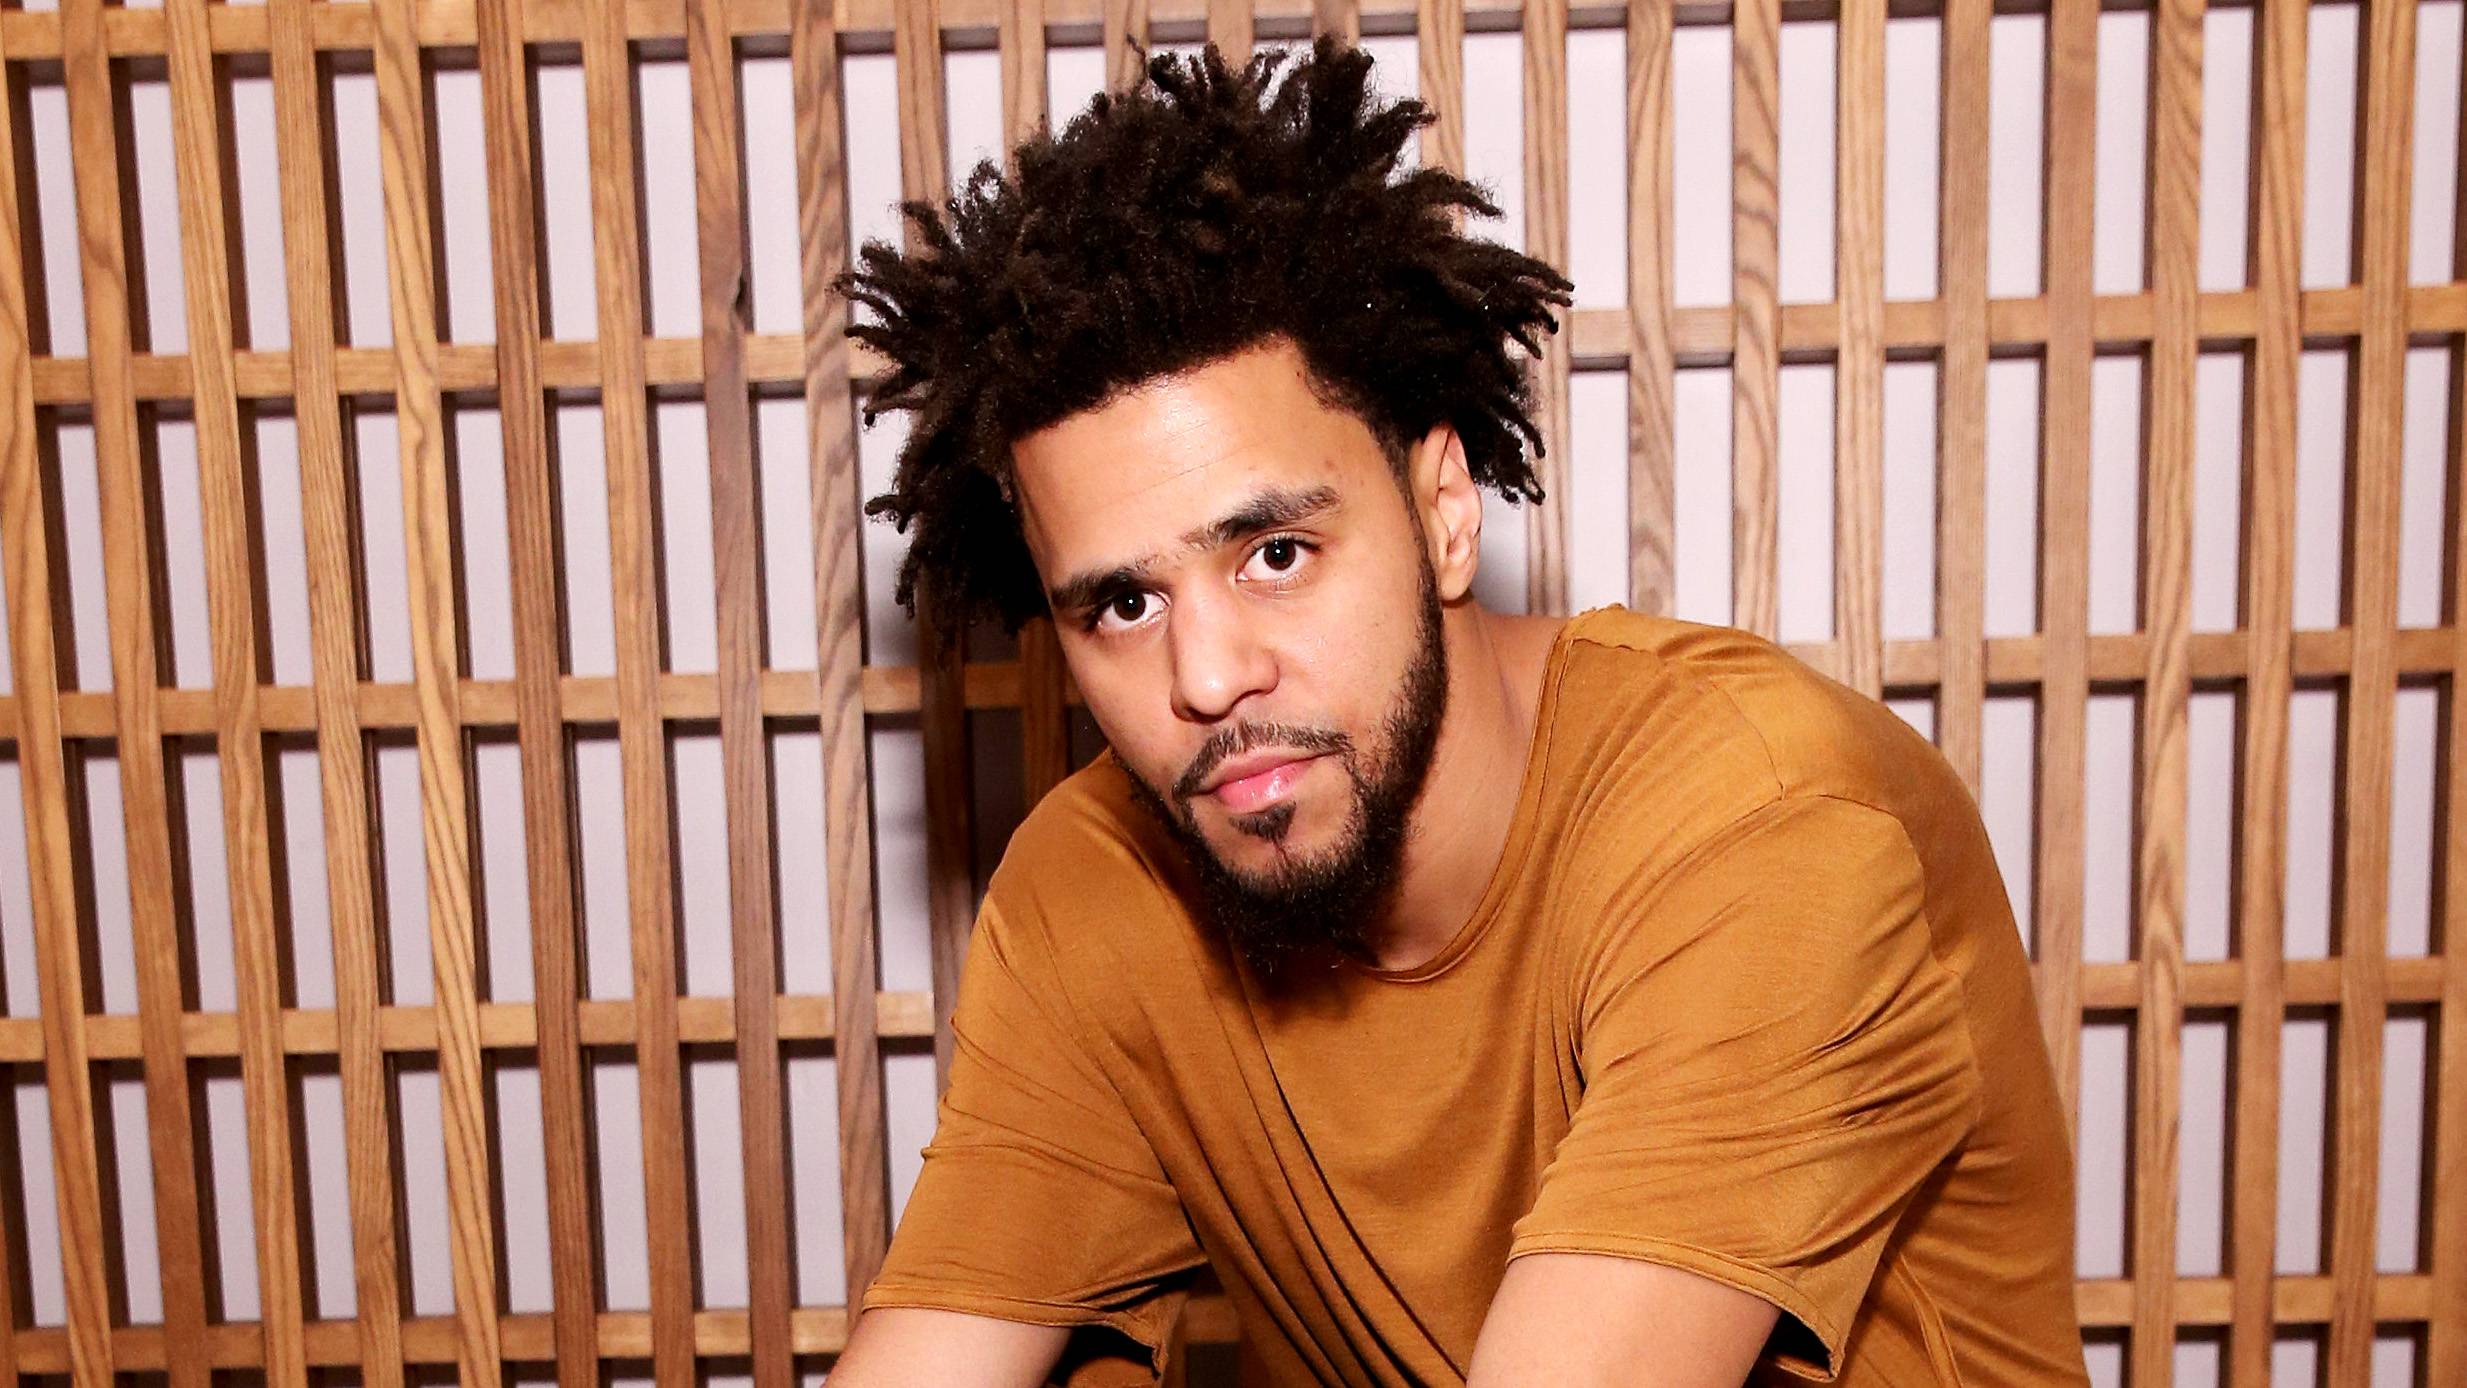 NEW YORK, NY - AUGUST 05:  J. Cole attends BALLY's 'Off the Grid' New York Premiere on August 5, 2015 in New York City.  (Photo by Neilson Barnard/Getty Images for BALLY)